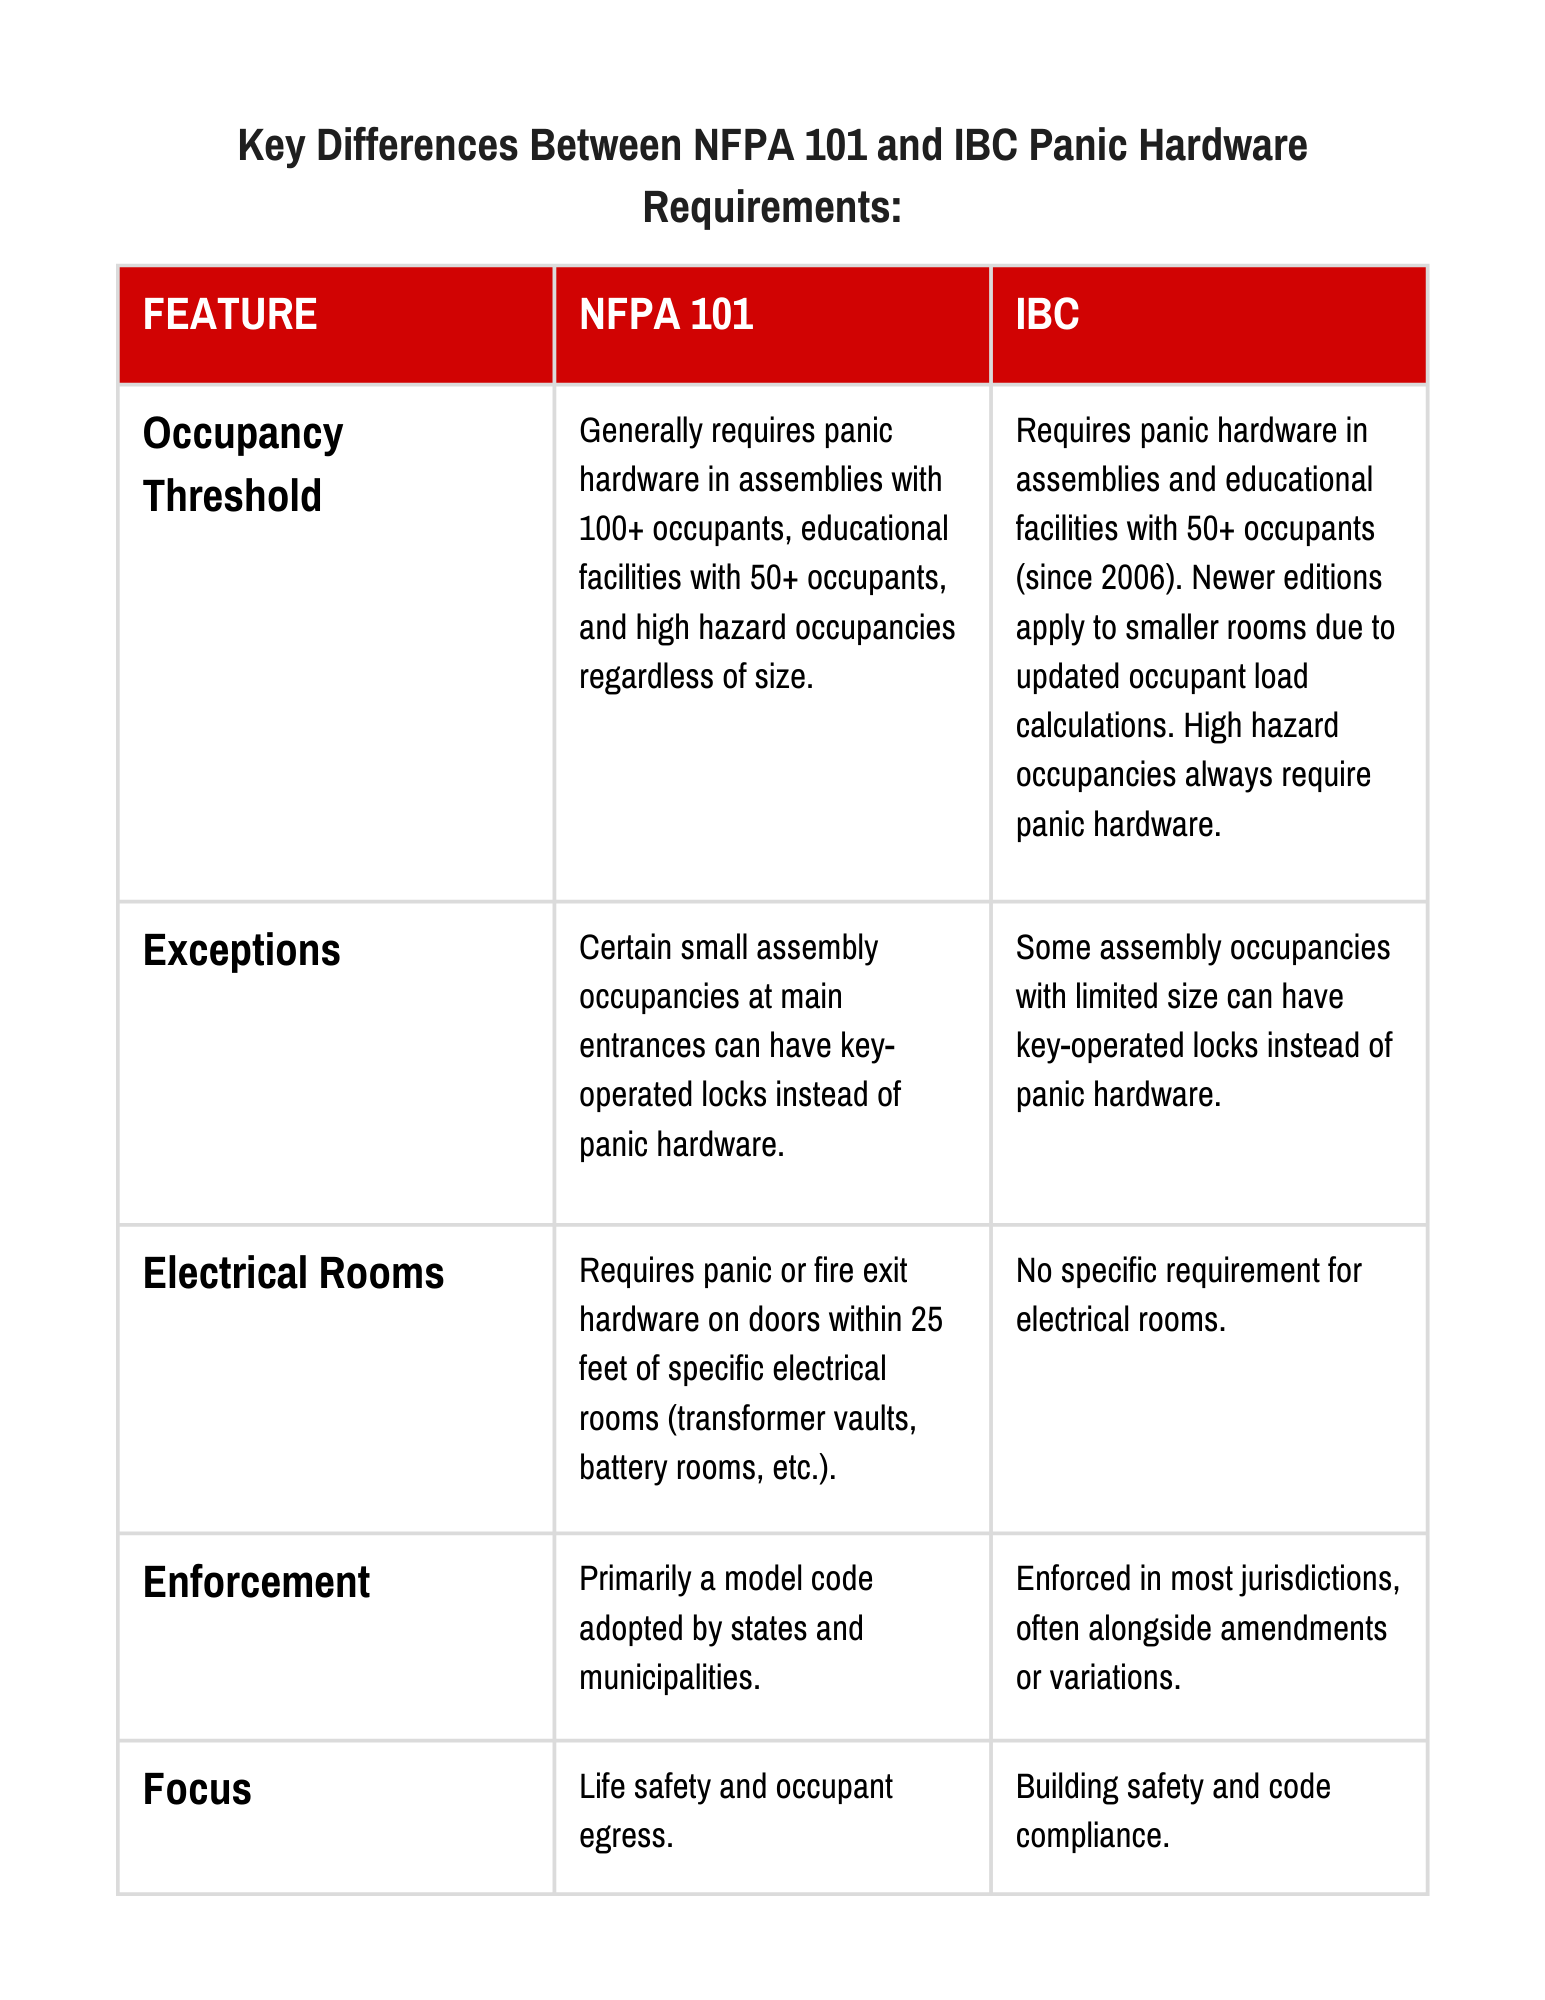 key-differences-between-nfpa-101-and-ibc-panic-hardware-requirements.png